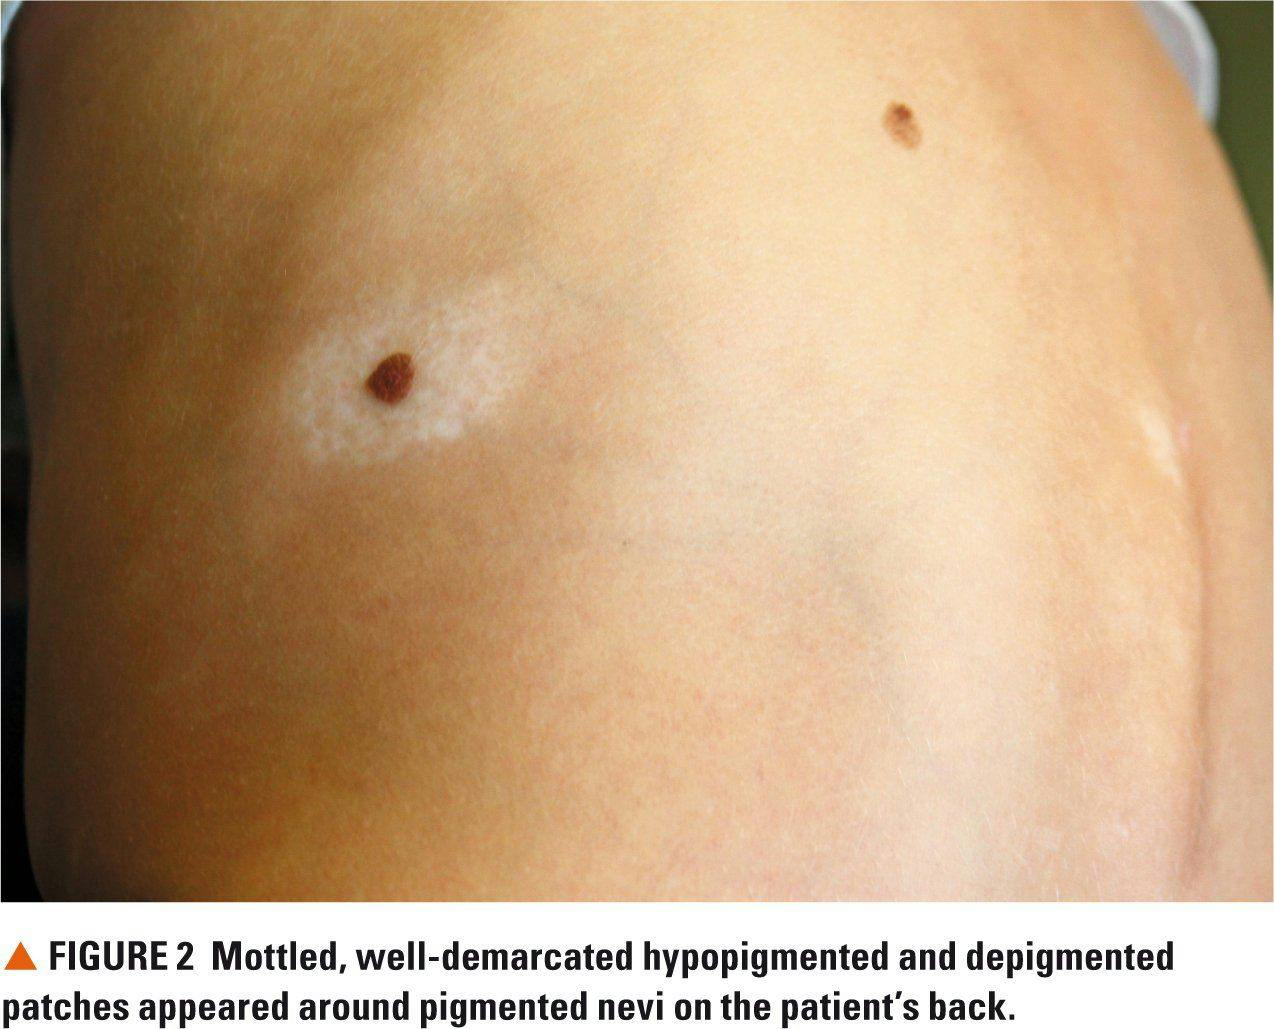 Figure 2. Mottled, well-demarcated hypopigmented and depigmented patches appeared around pigmented nevi on the patient's back.